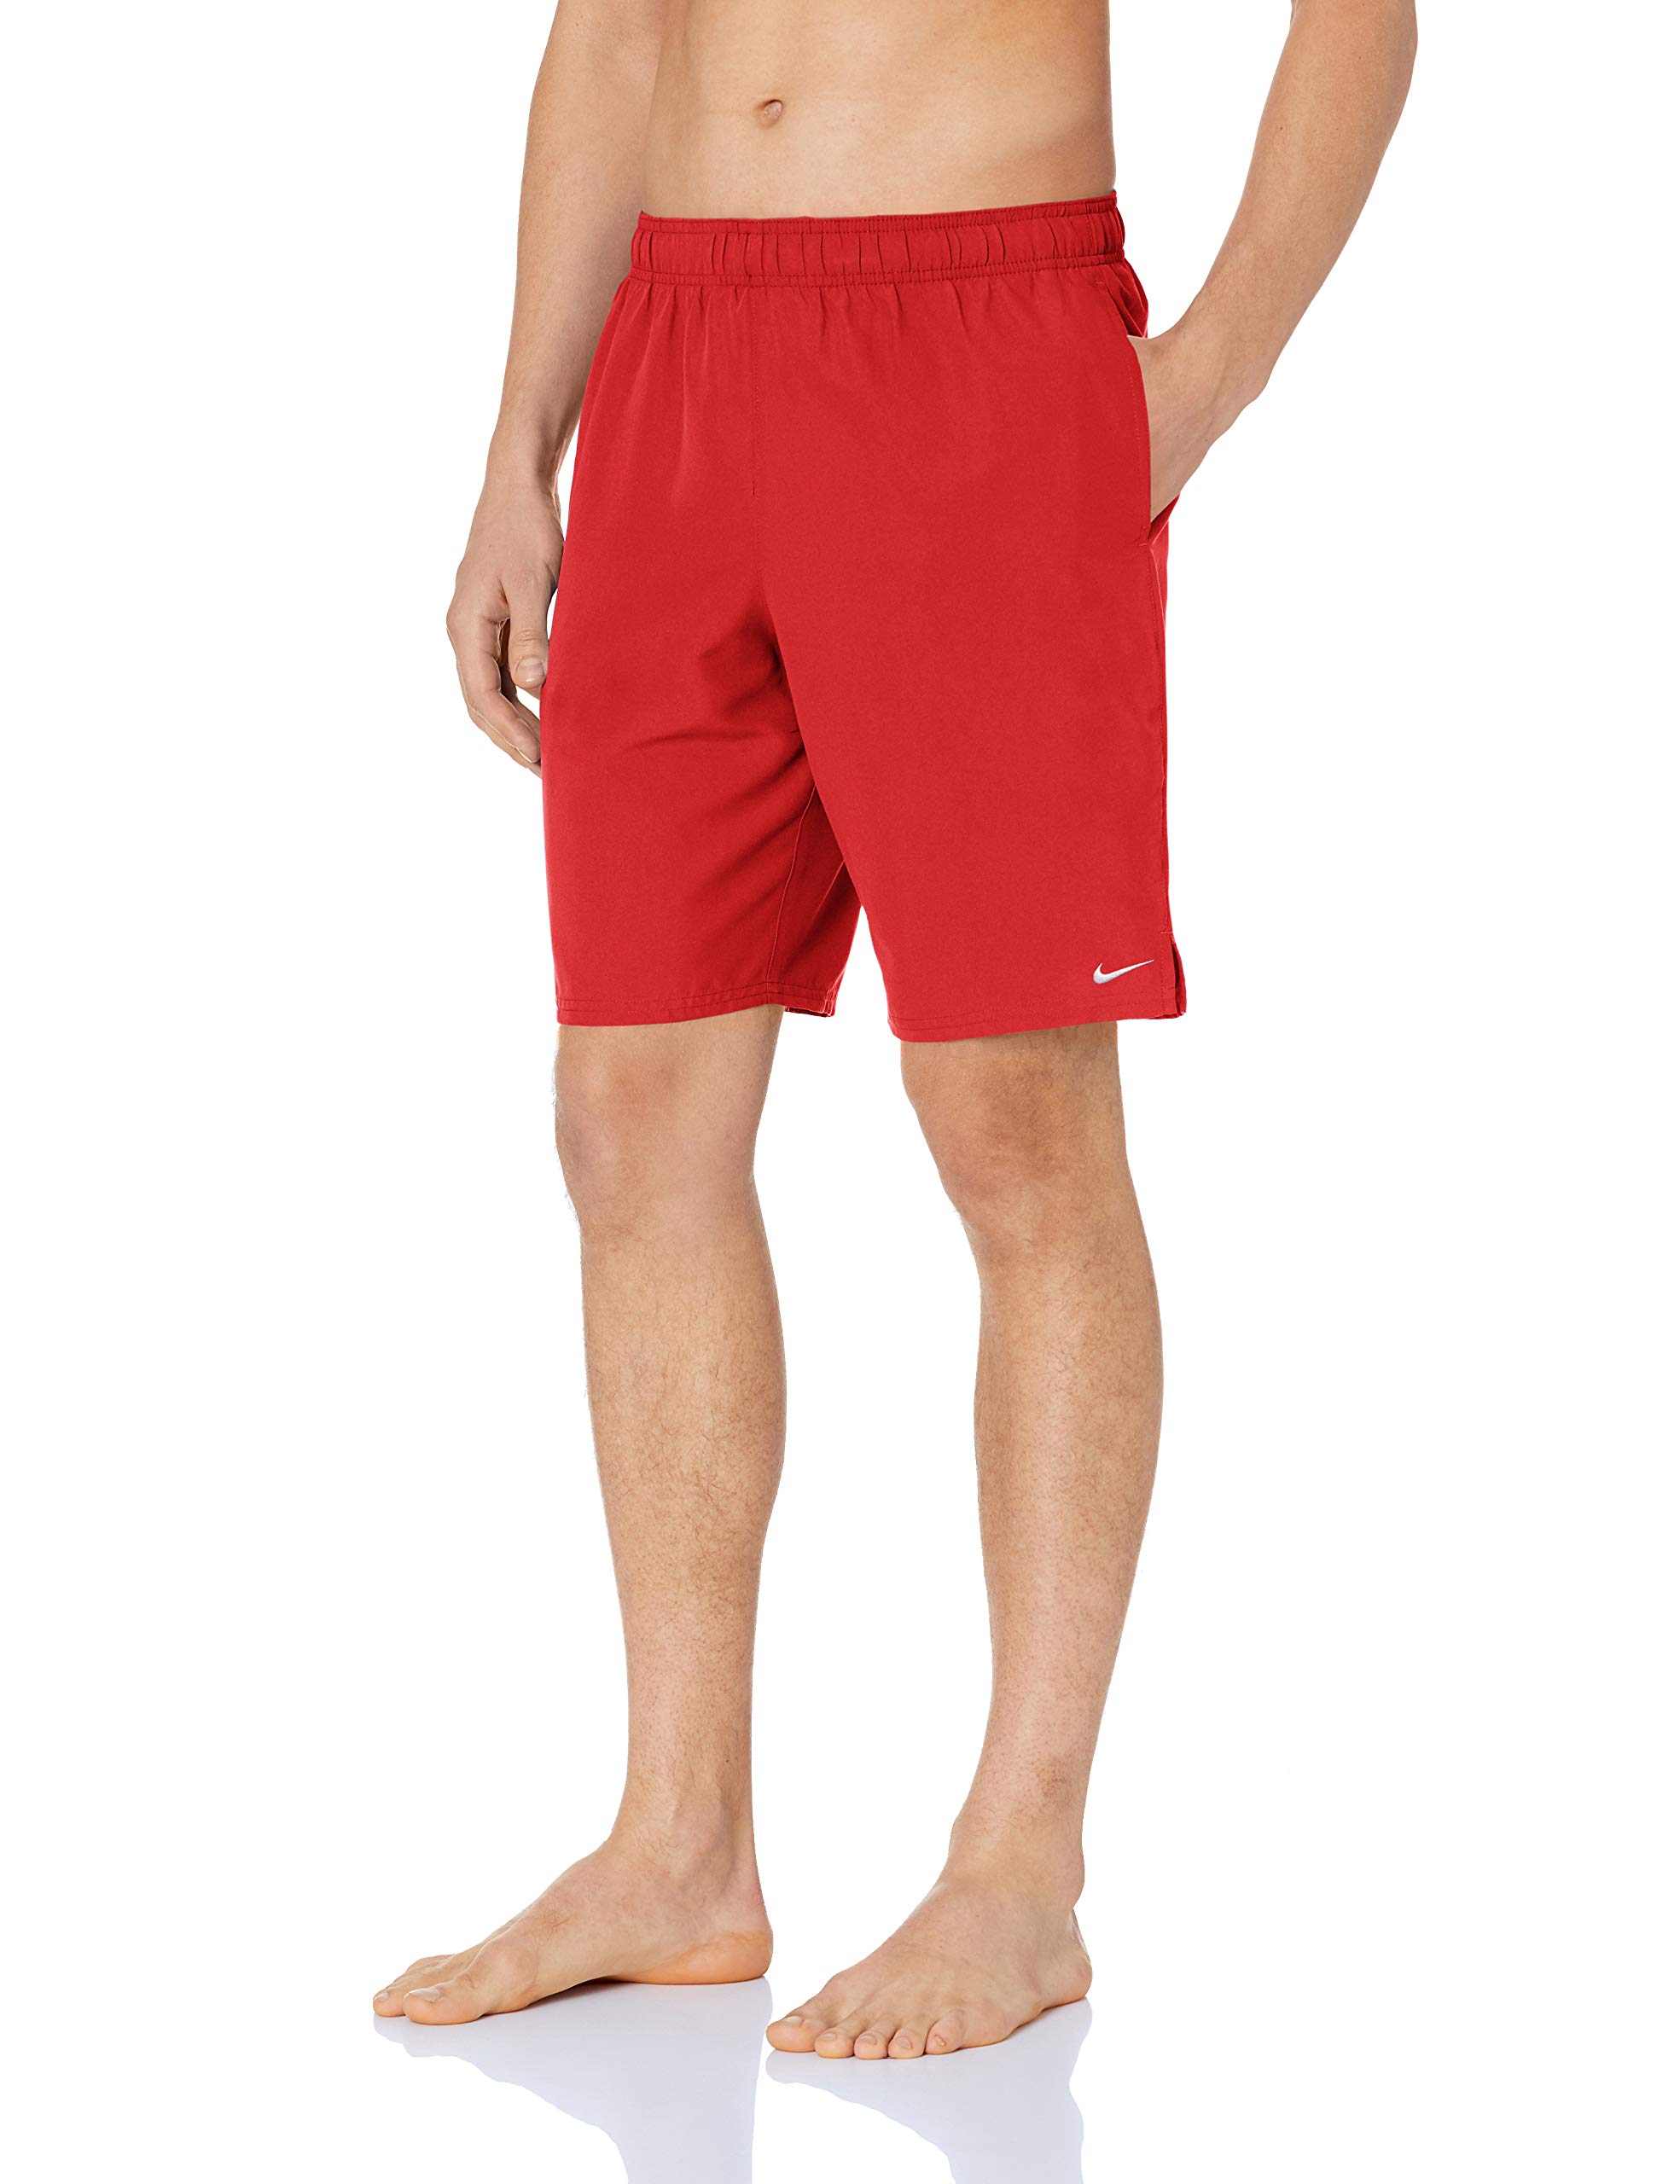 Nike Mens Solid Lap 9 Inch Volley Short Swim Trunk - University Red White - XL